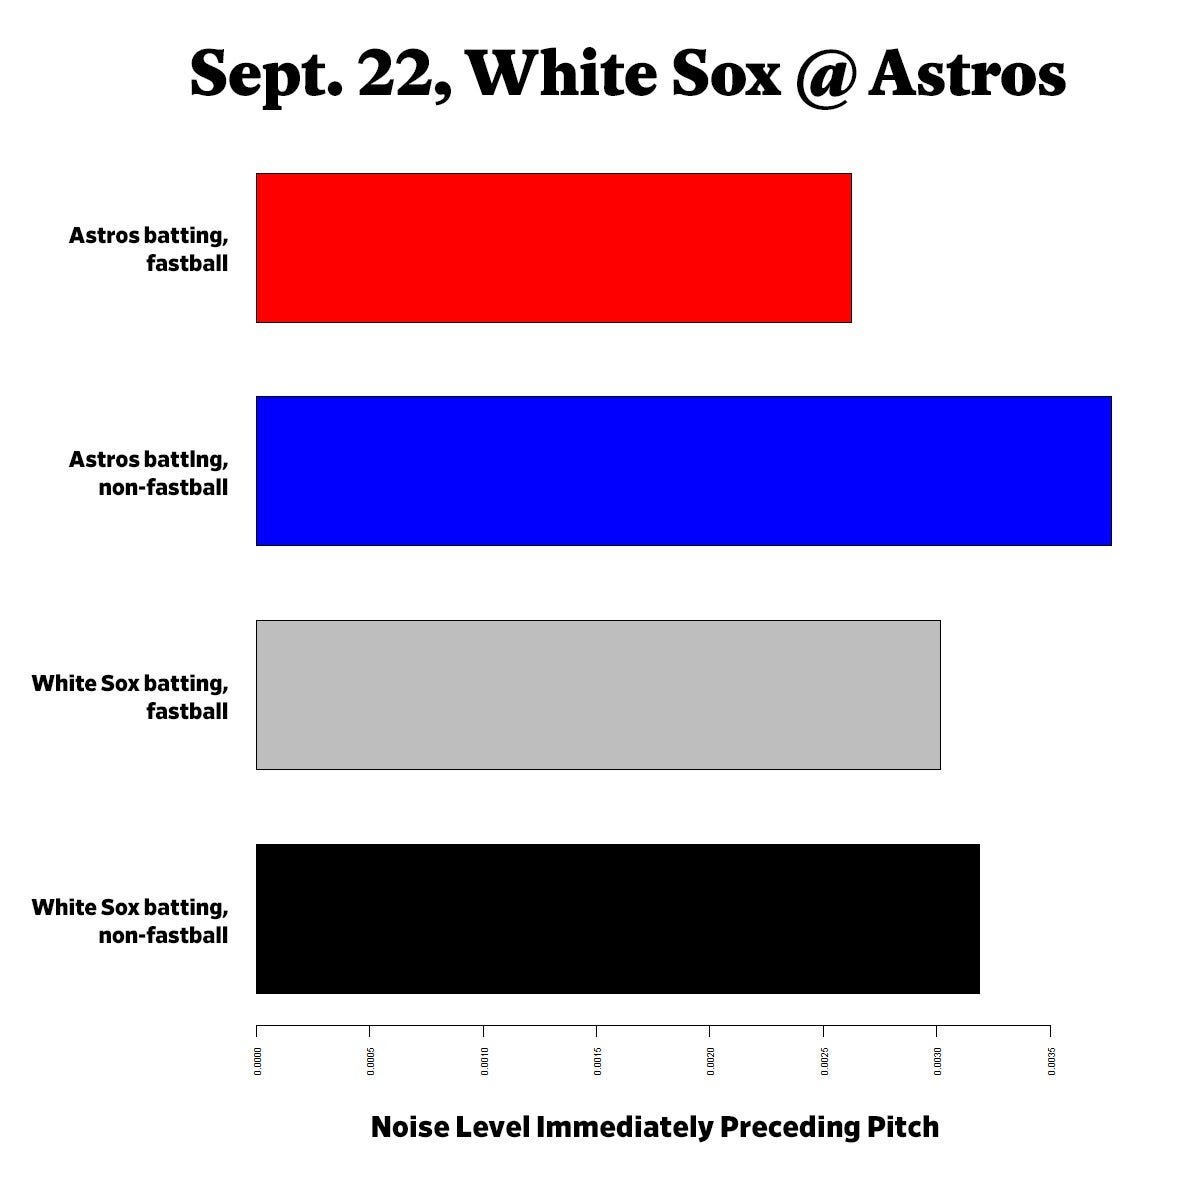 Graph showing the Astros and White Sox fastball batting and noise levels preceding pitch